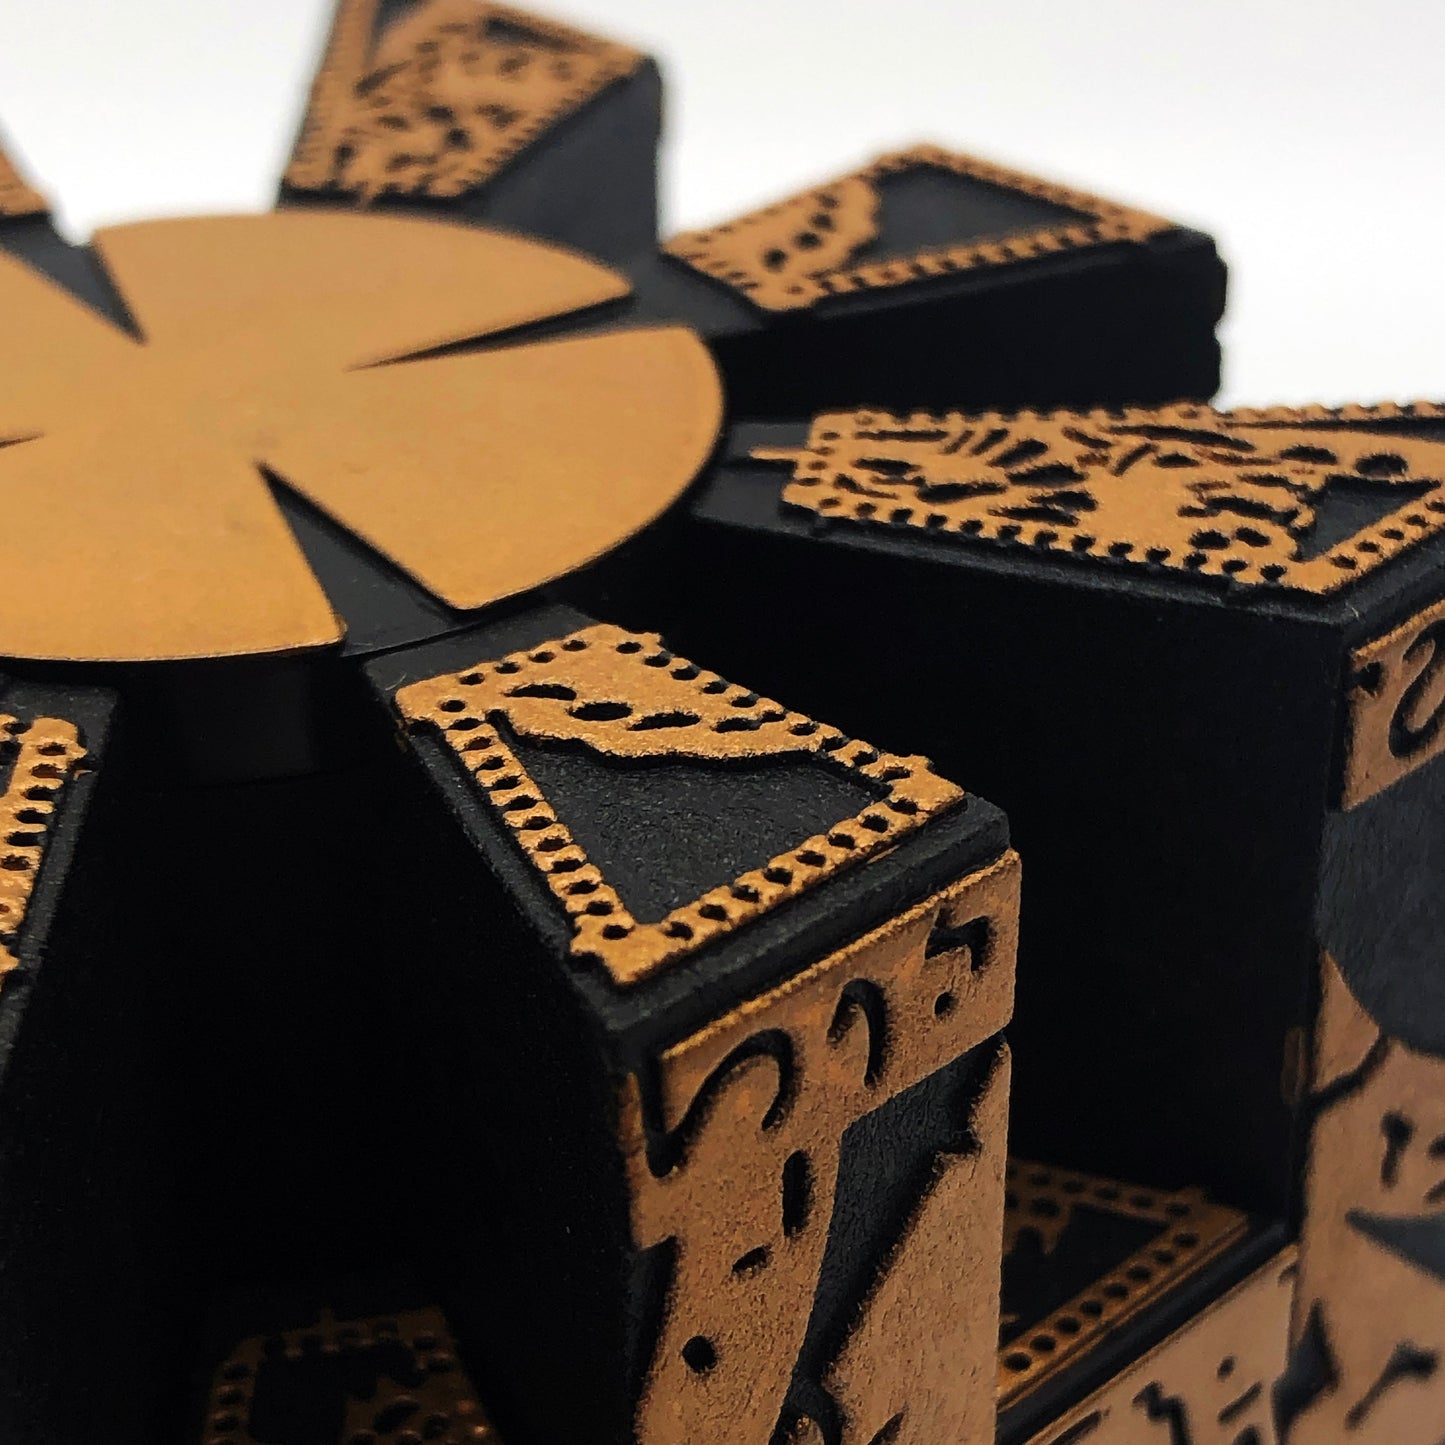 Close up shot of the detail on the Horrorfier Hellraiser Puzzle Box Ornament